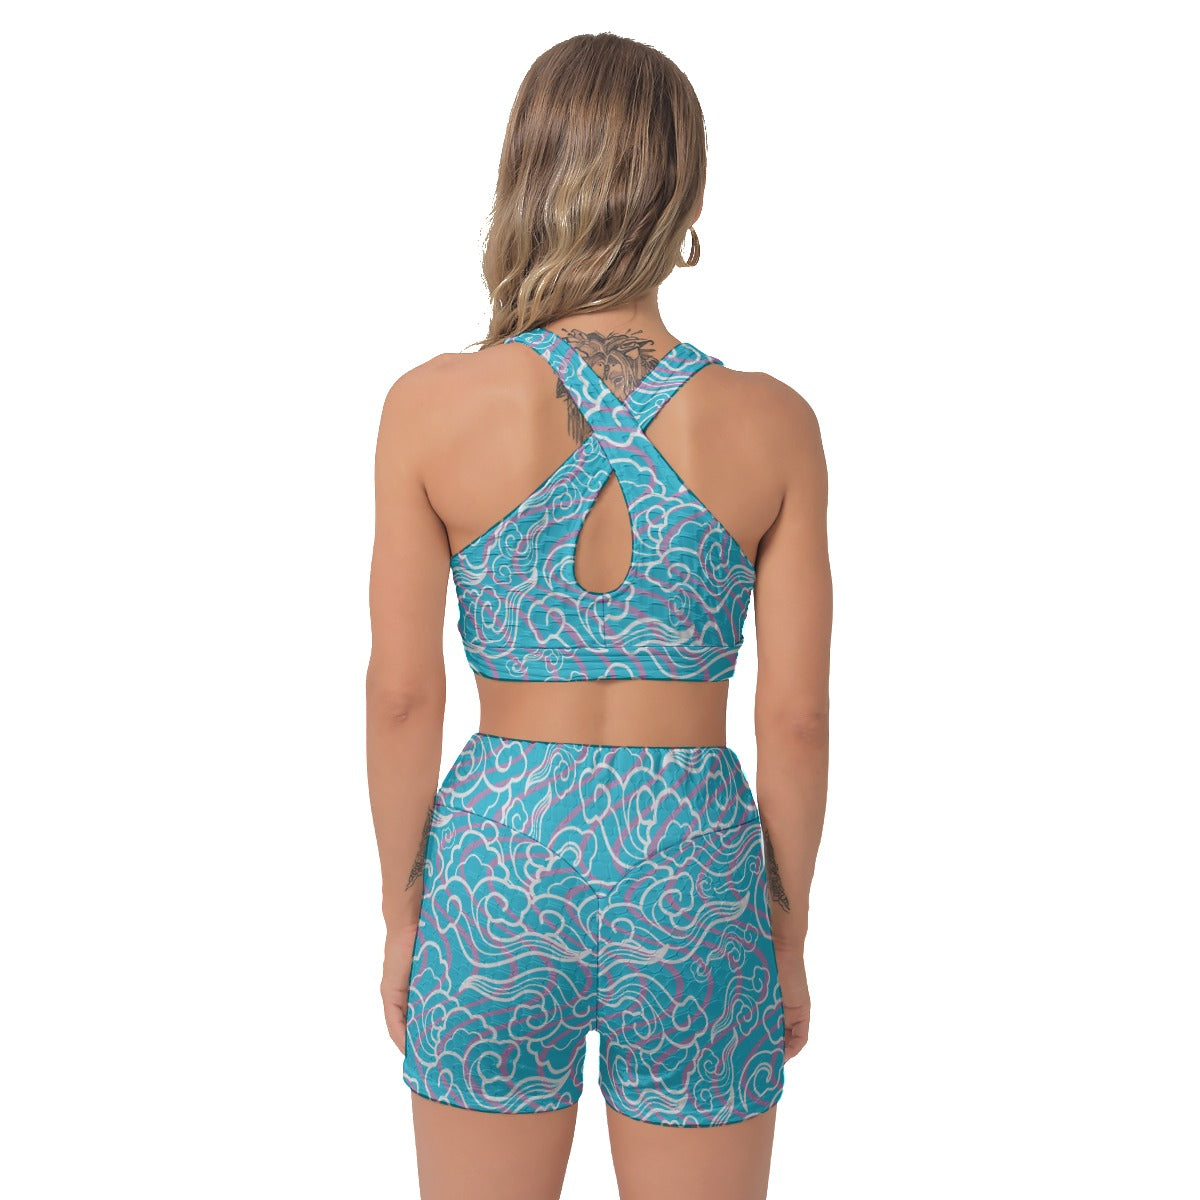 Under The Sea Sports Bra and Shorts Set - AnimePhysique